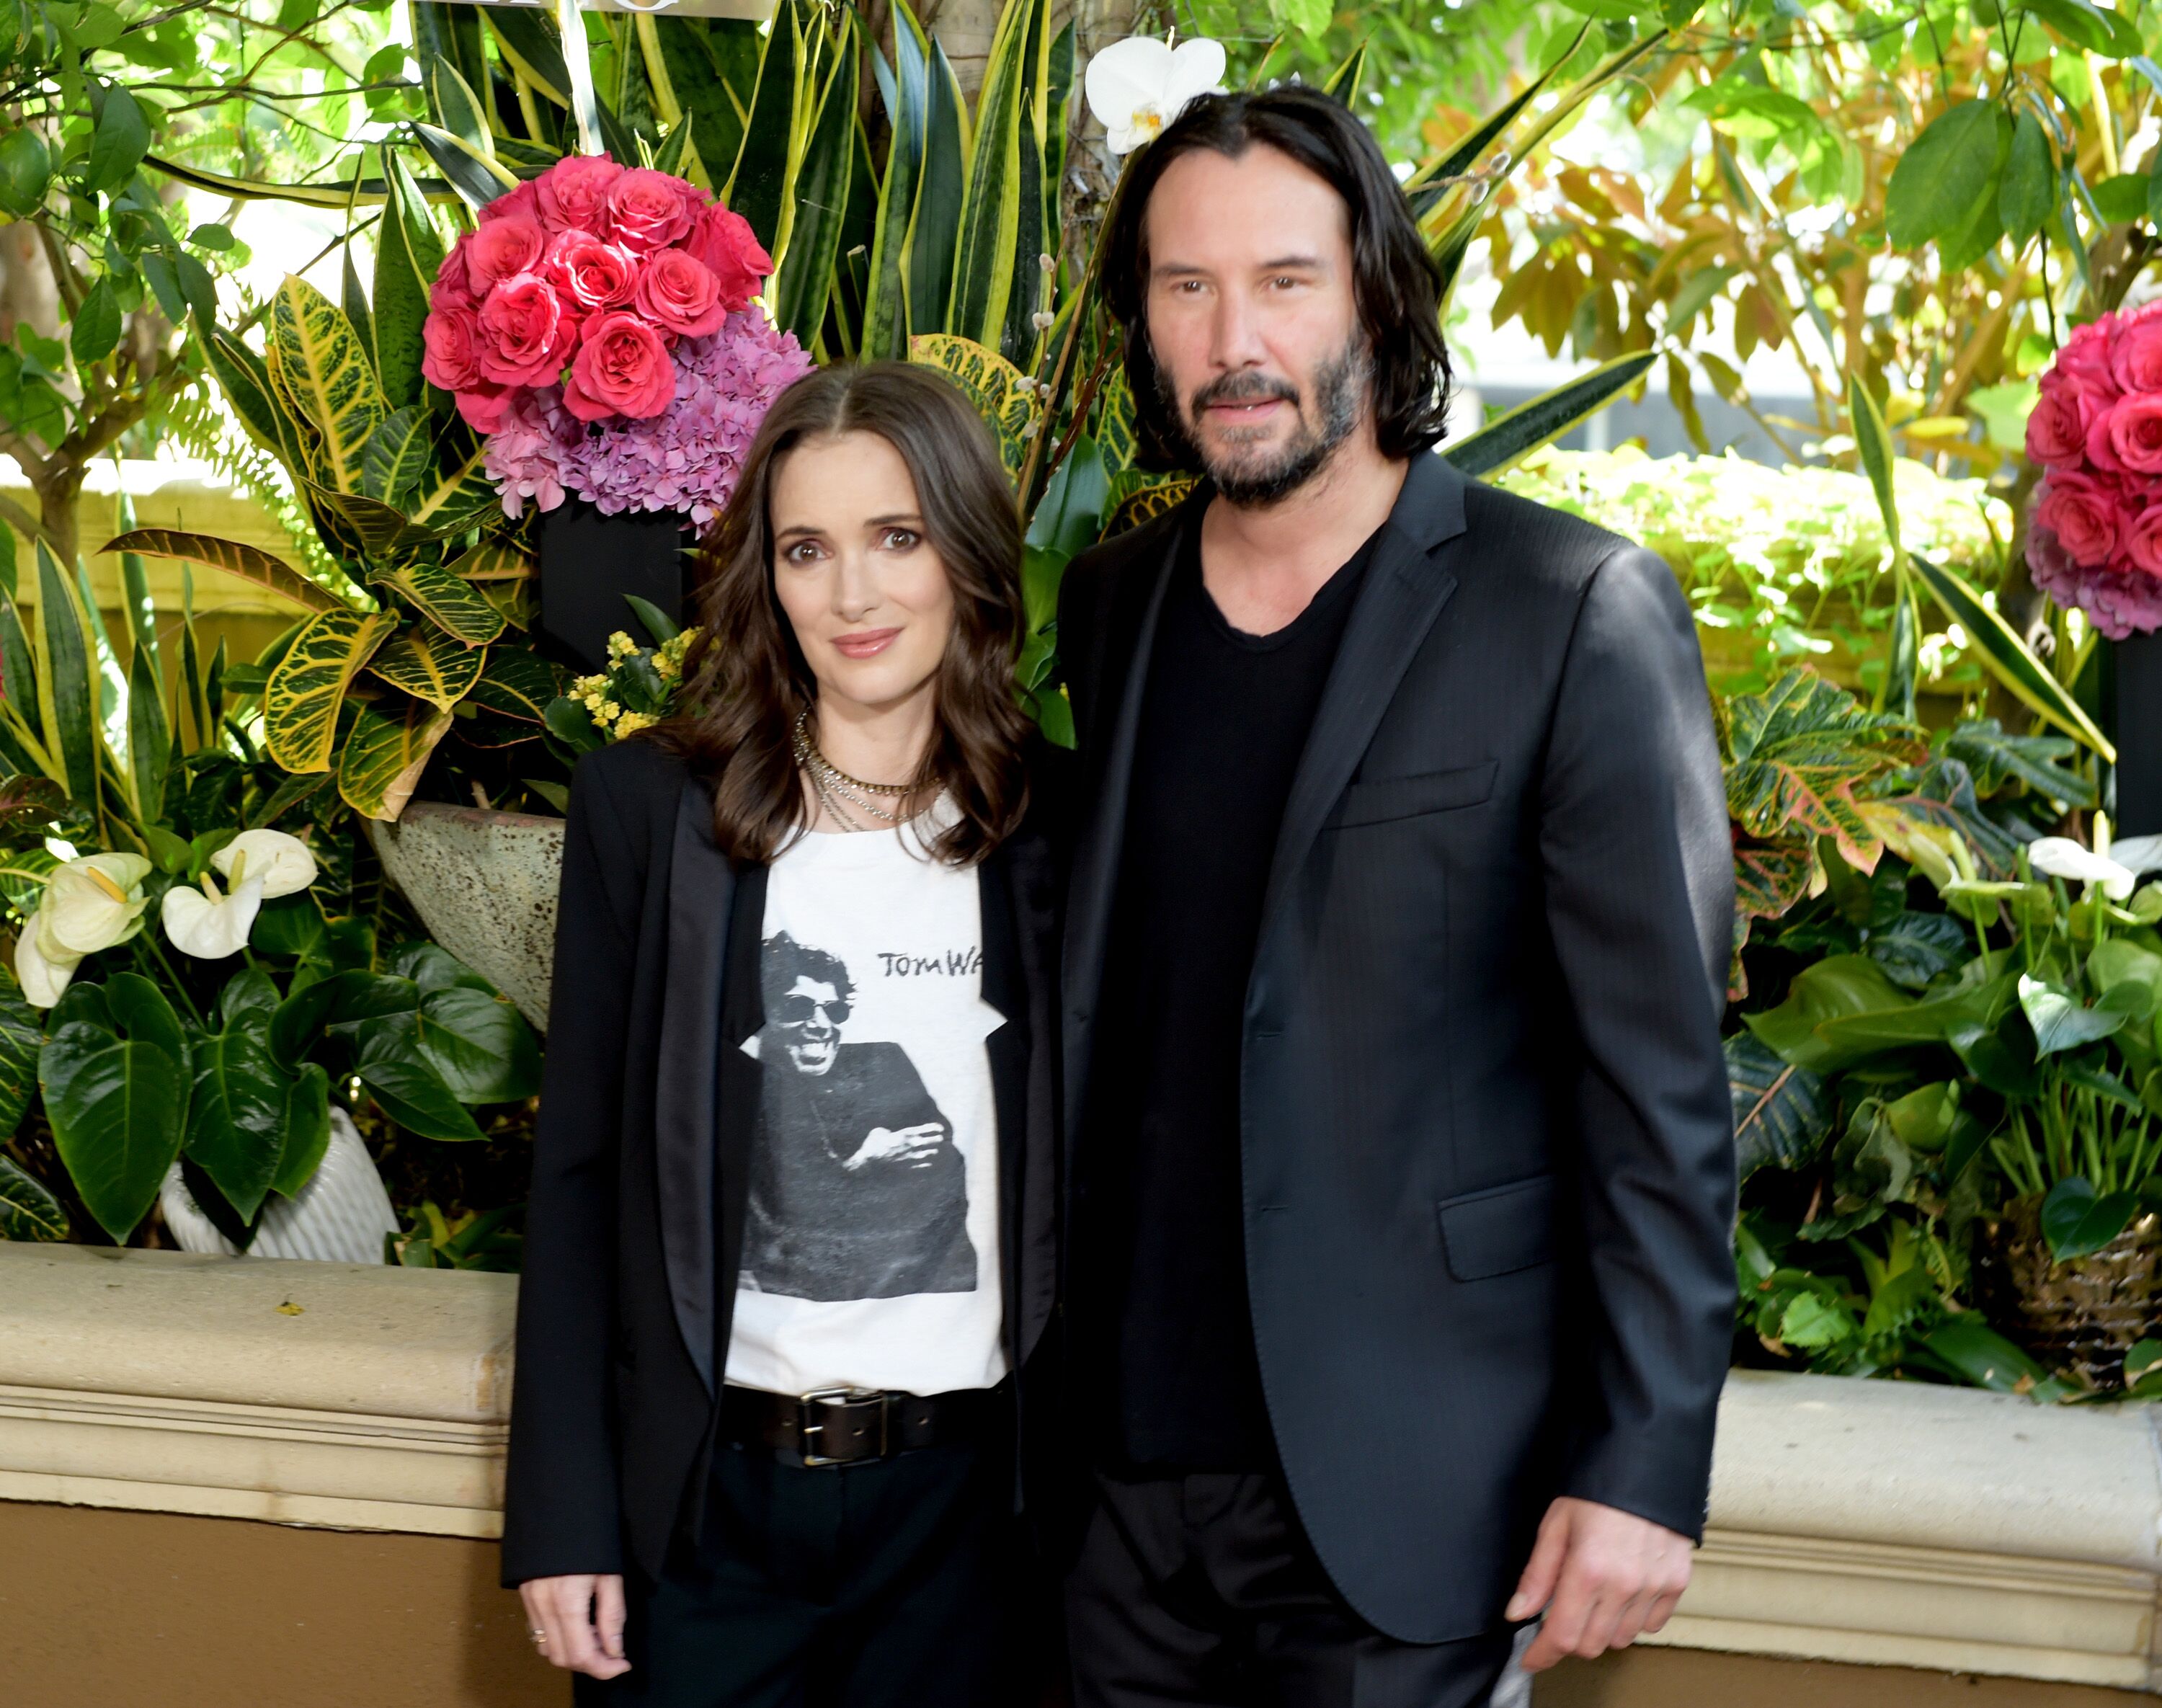 Keanu Reeves and Jennifer Syme. | Source: Getty Images